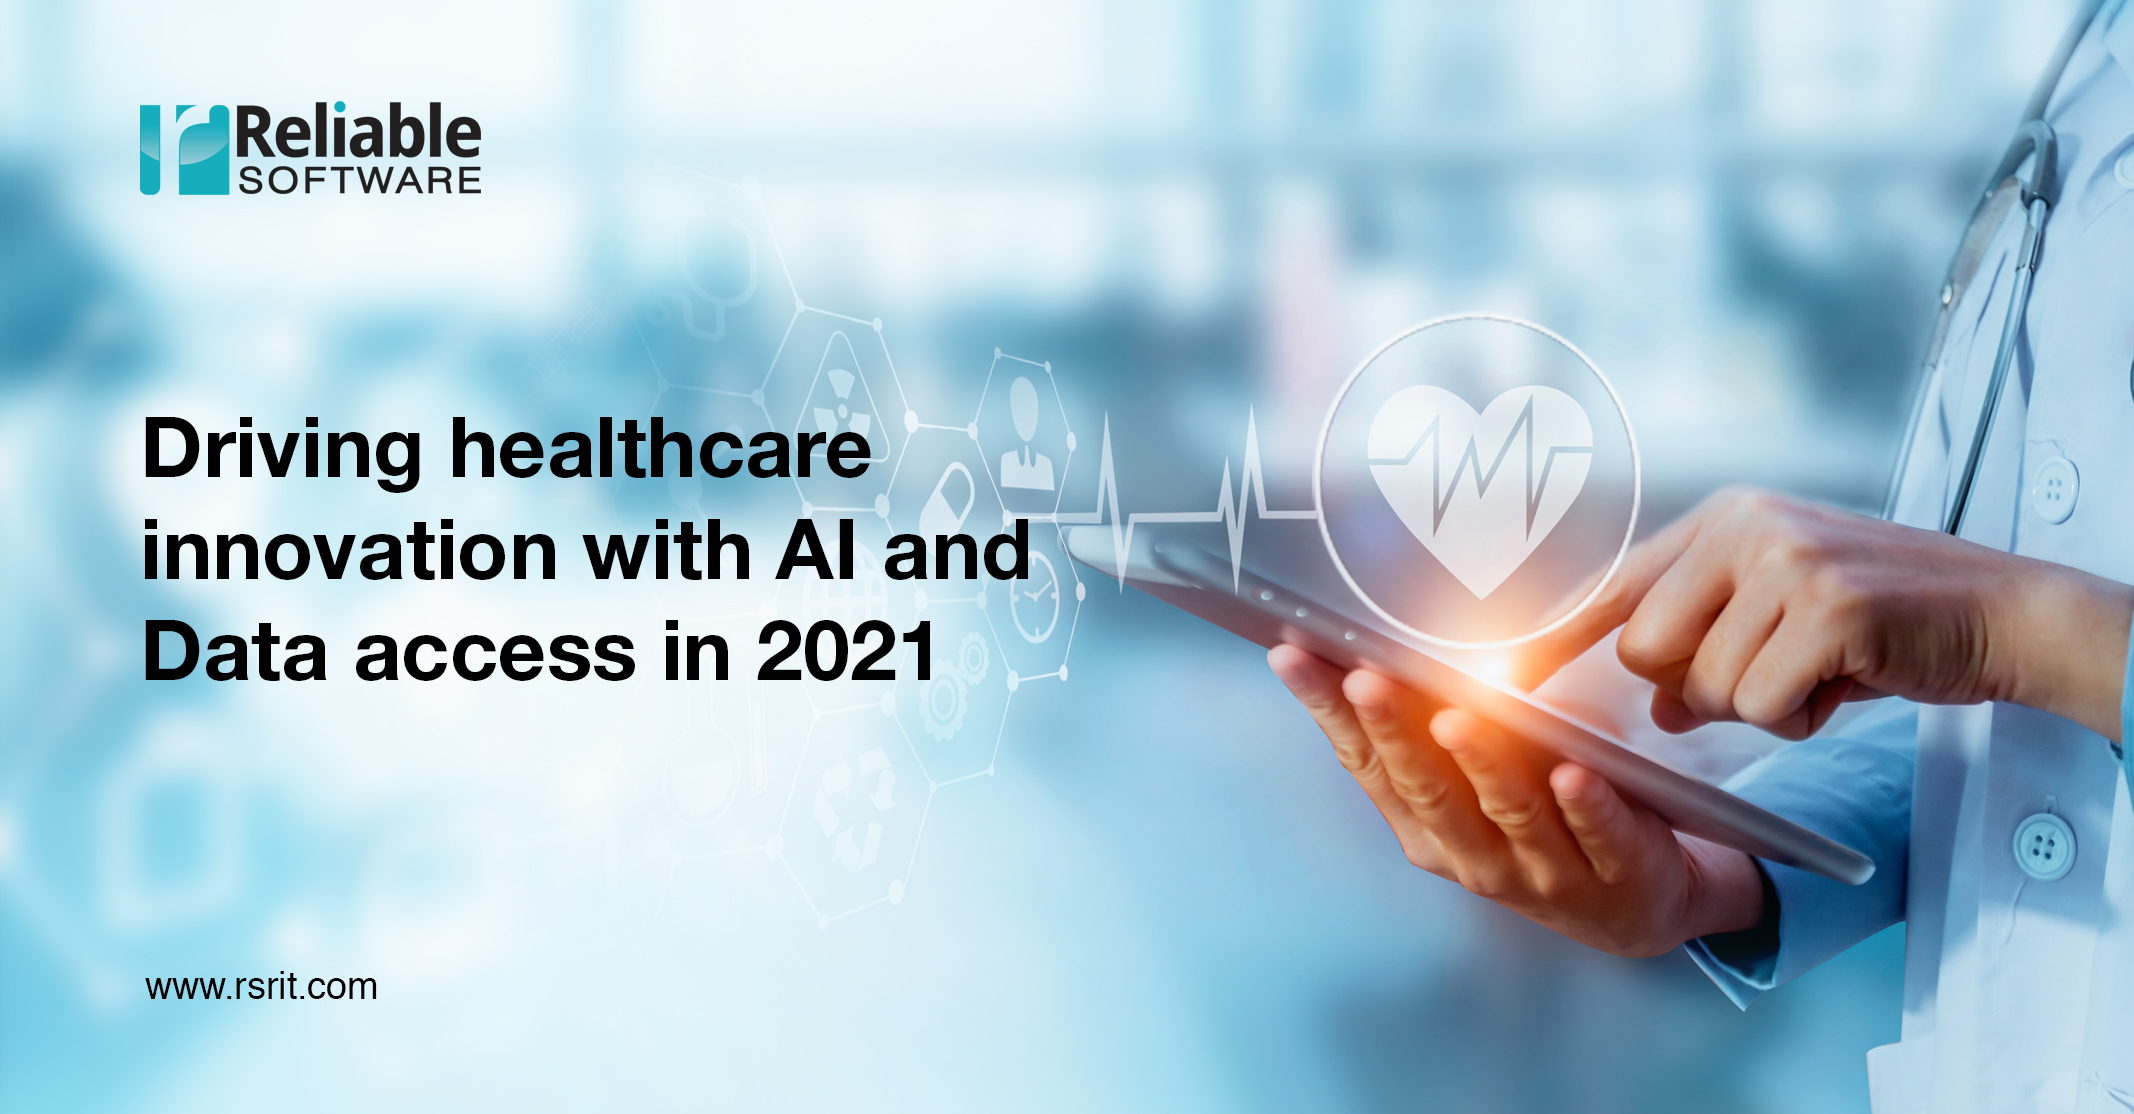 Driving healthcare innovation with AI and Data access in 2021